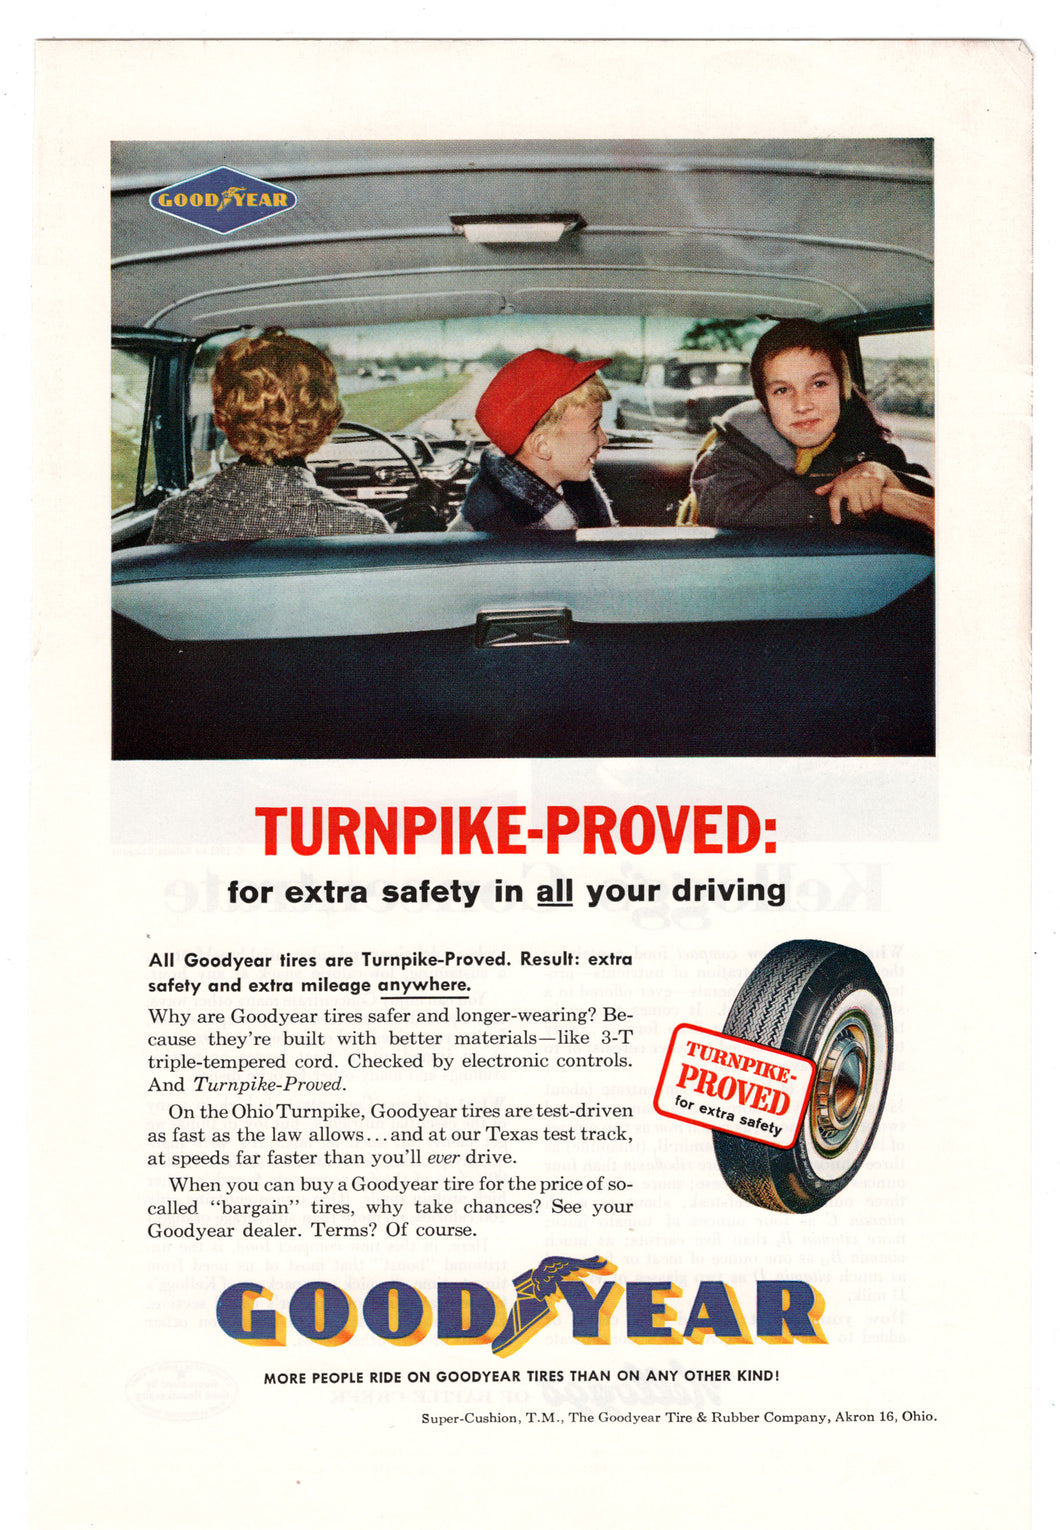 Good Year Tires - Vintage Ad - (Turnpike-Proved) #  577 - 1960's